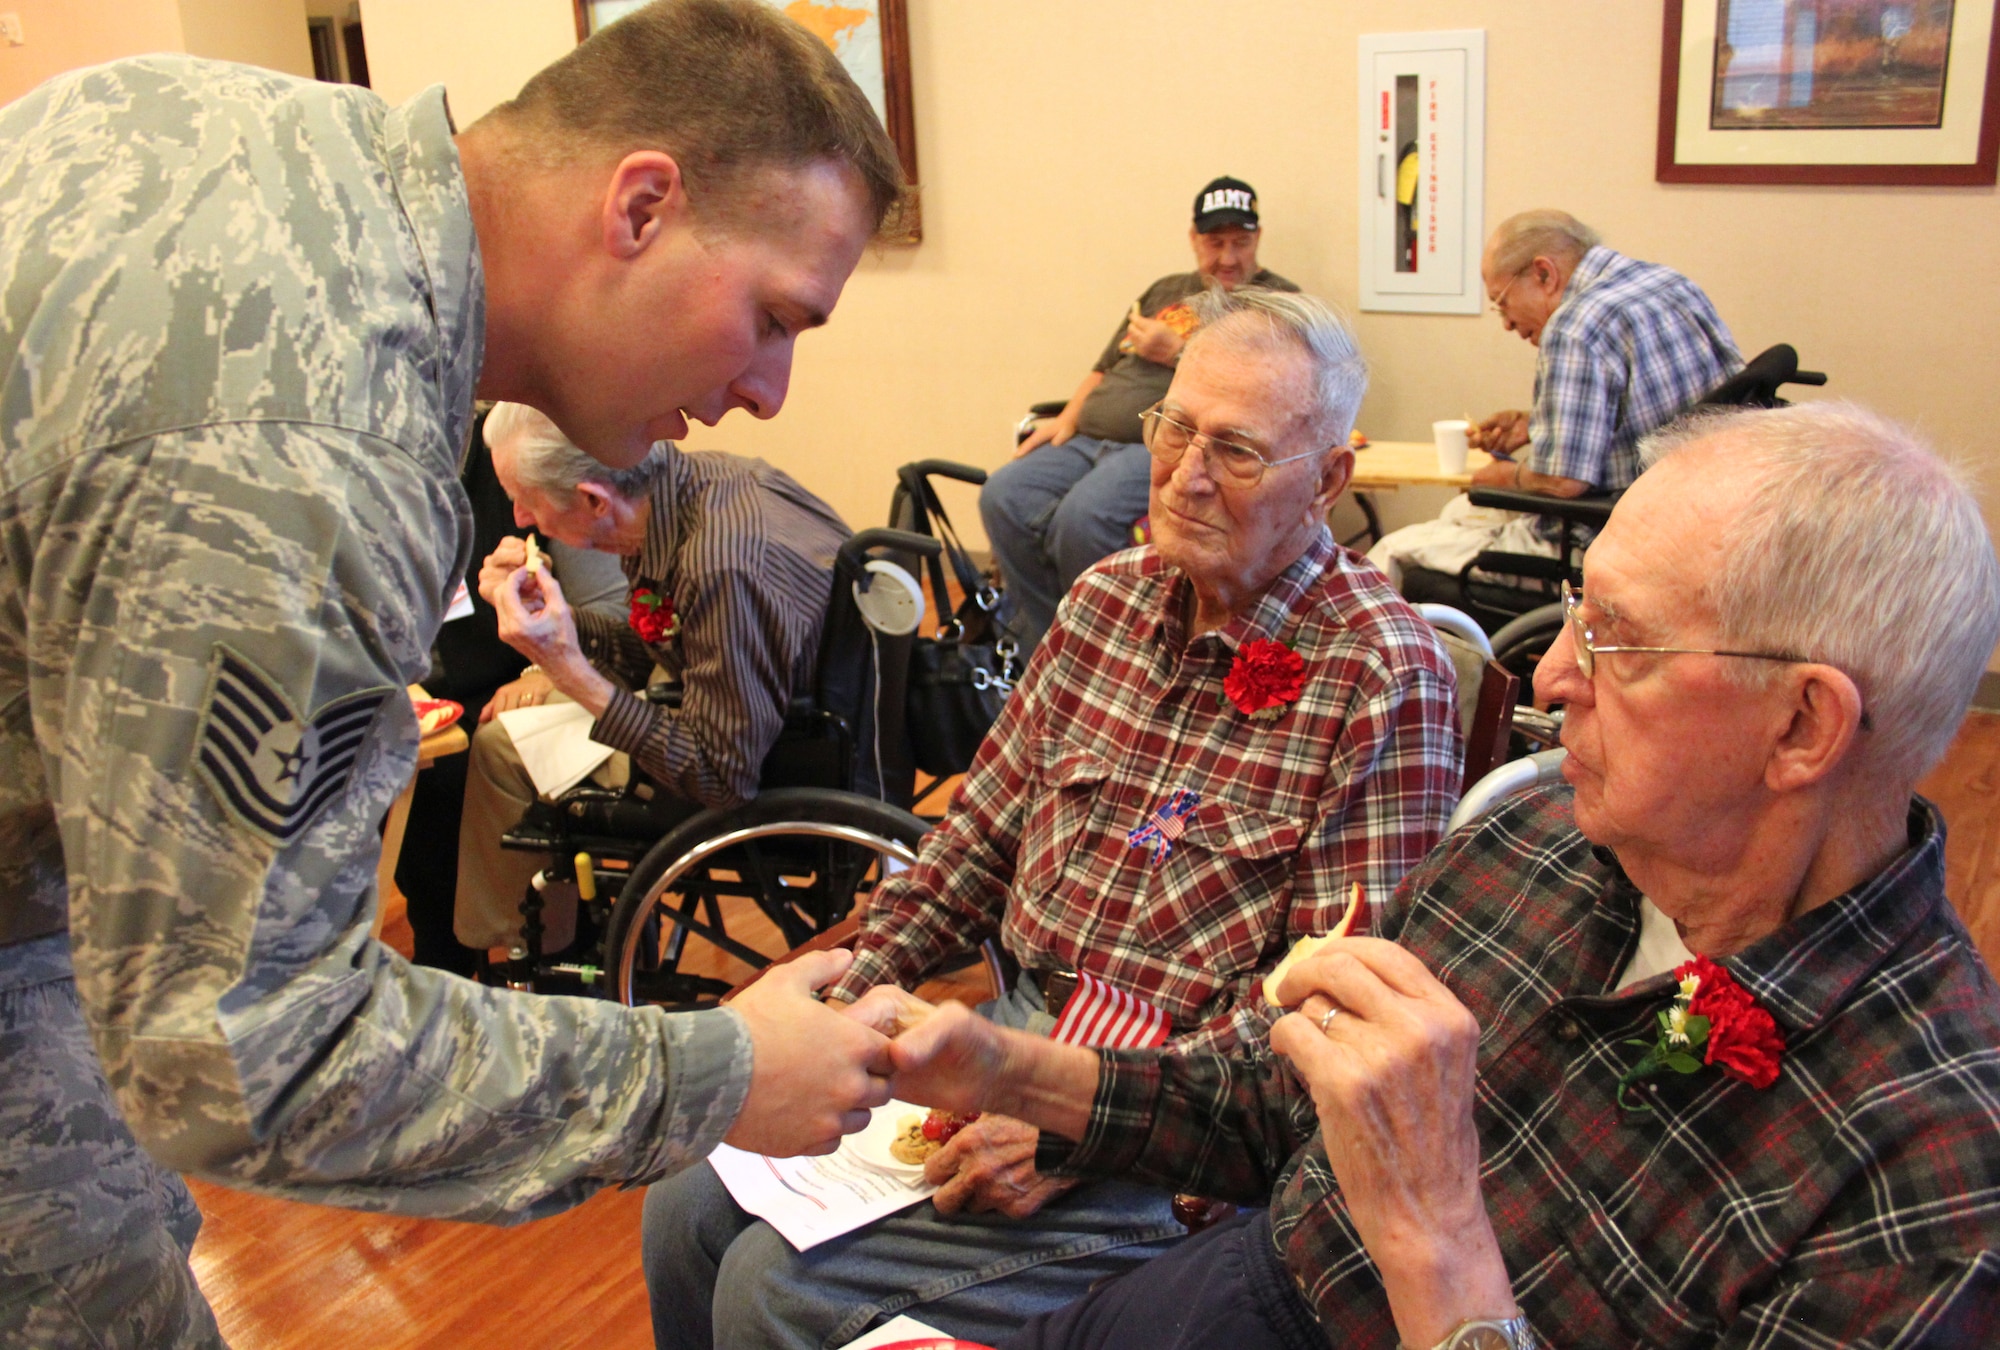 Tech. Sgt. Joseph Schwartz, a 310th Security Forces member, learns a new hand shake from Warren "Hutch" Hutchings (right), while Joseph Griggs watches at the veterans nursing home in Aurora, Colo. The 310th Space Wing teamed up with the Denver Hospice to honor local veterans during a Veterans Day ceremony at the Veterans Nursing Home at Fitzsimons on Nov. 11. (U.S. Air Force photo/Tech. Sgt. Scott P. Farley)